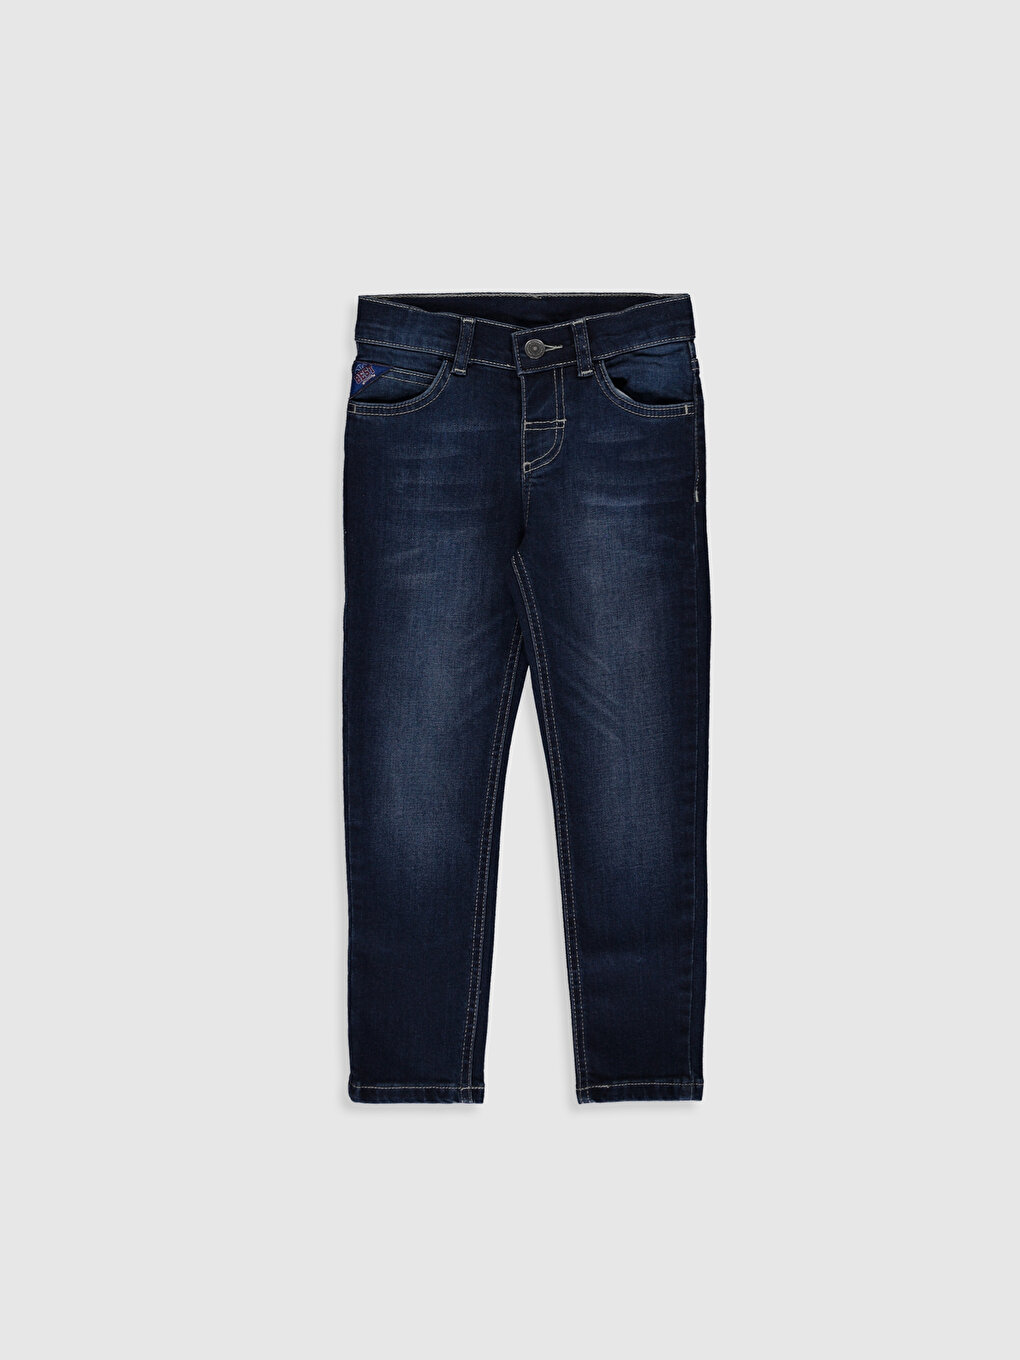 Buy B2 Regular Baby Boys Blue Jeans (12-18 Months) at Amazon.in